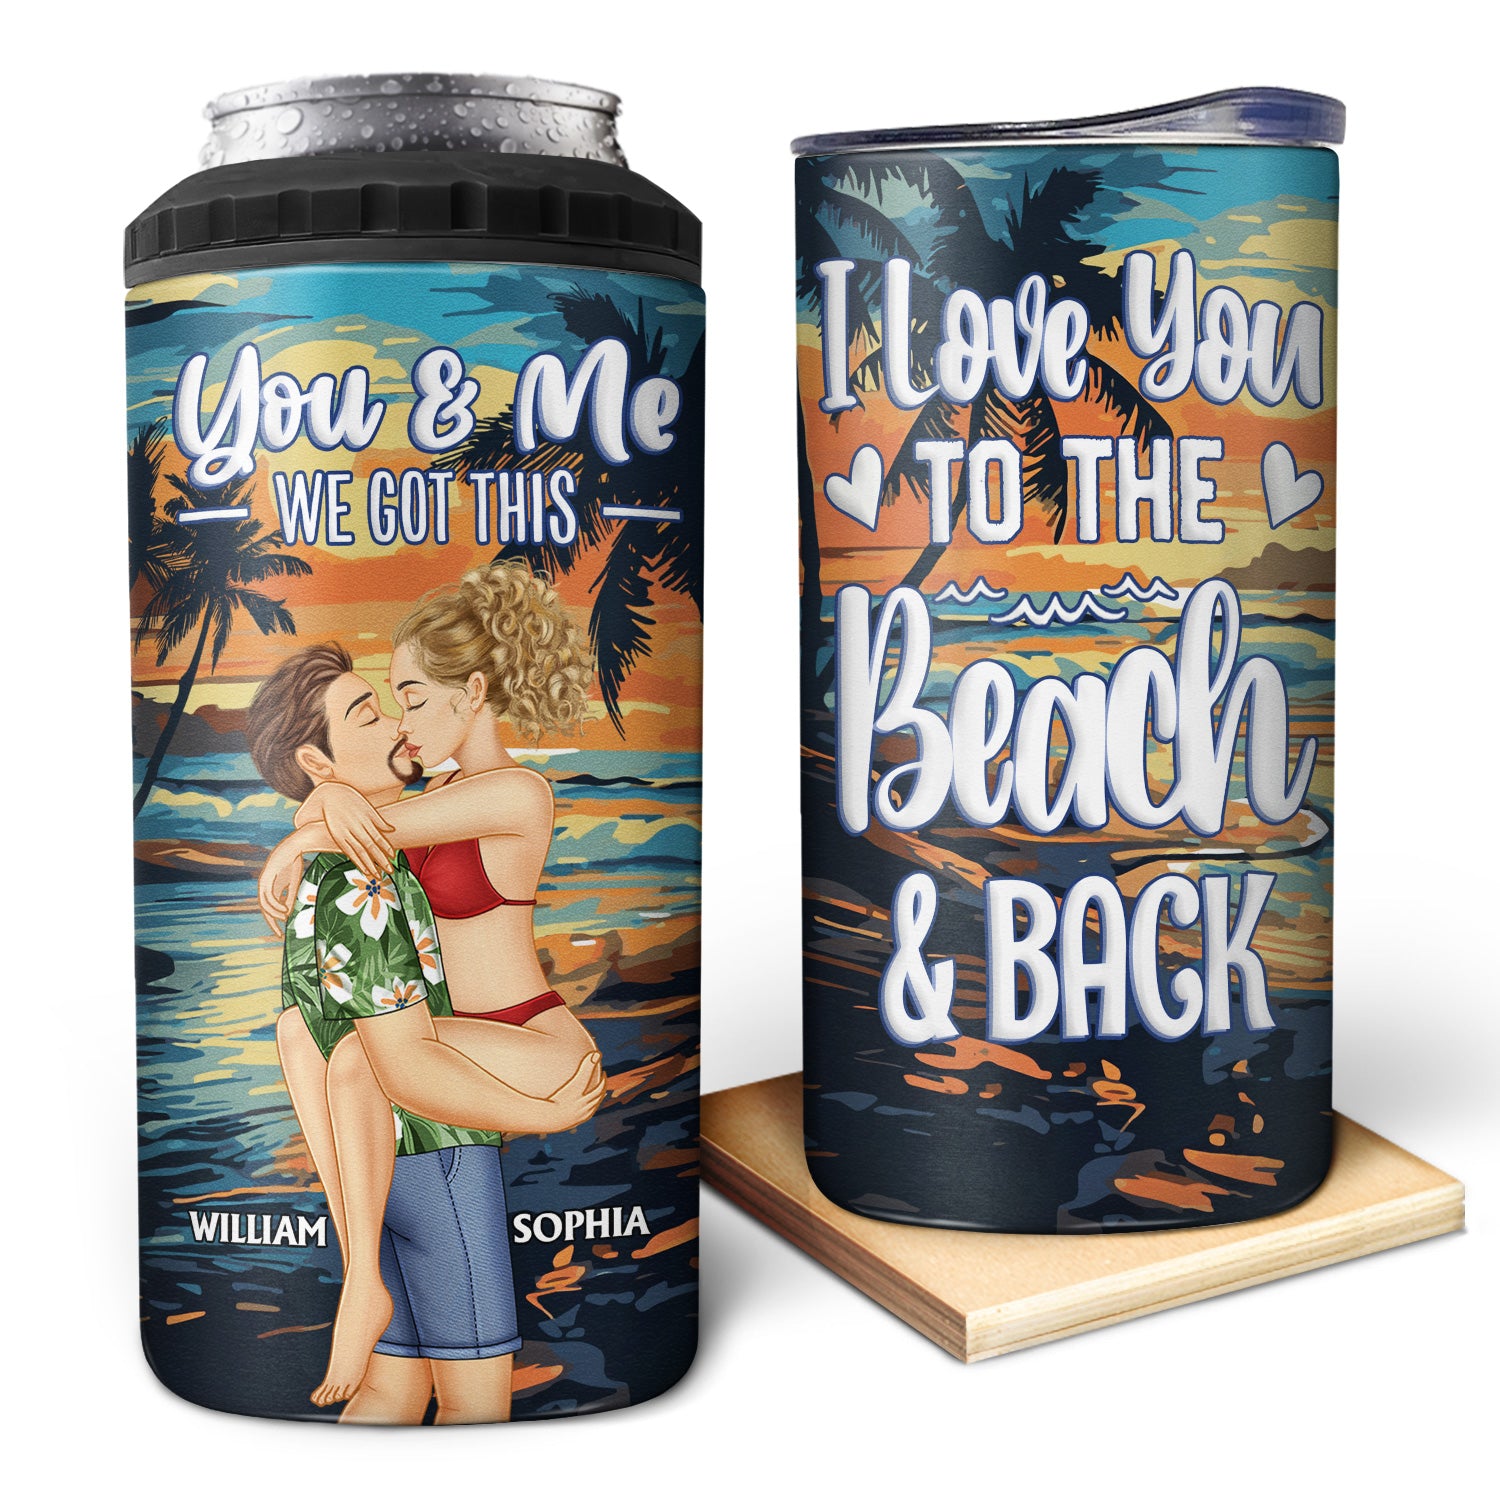 You And Me And The Sea - Birthday, Loving, Anniversary, Vacation, Travel Gift For Spouse, Husband, Wife, Couple, Boyfriend, Girlfriend - Personalized 4 In 1 Can Cooler Tumbler